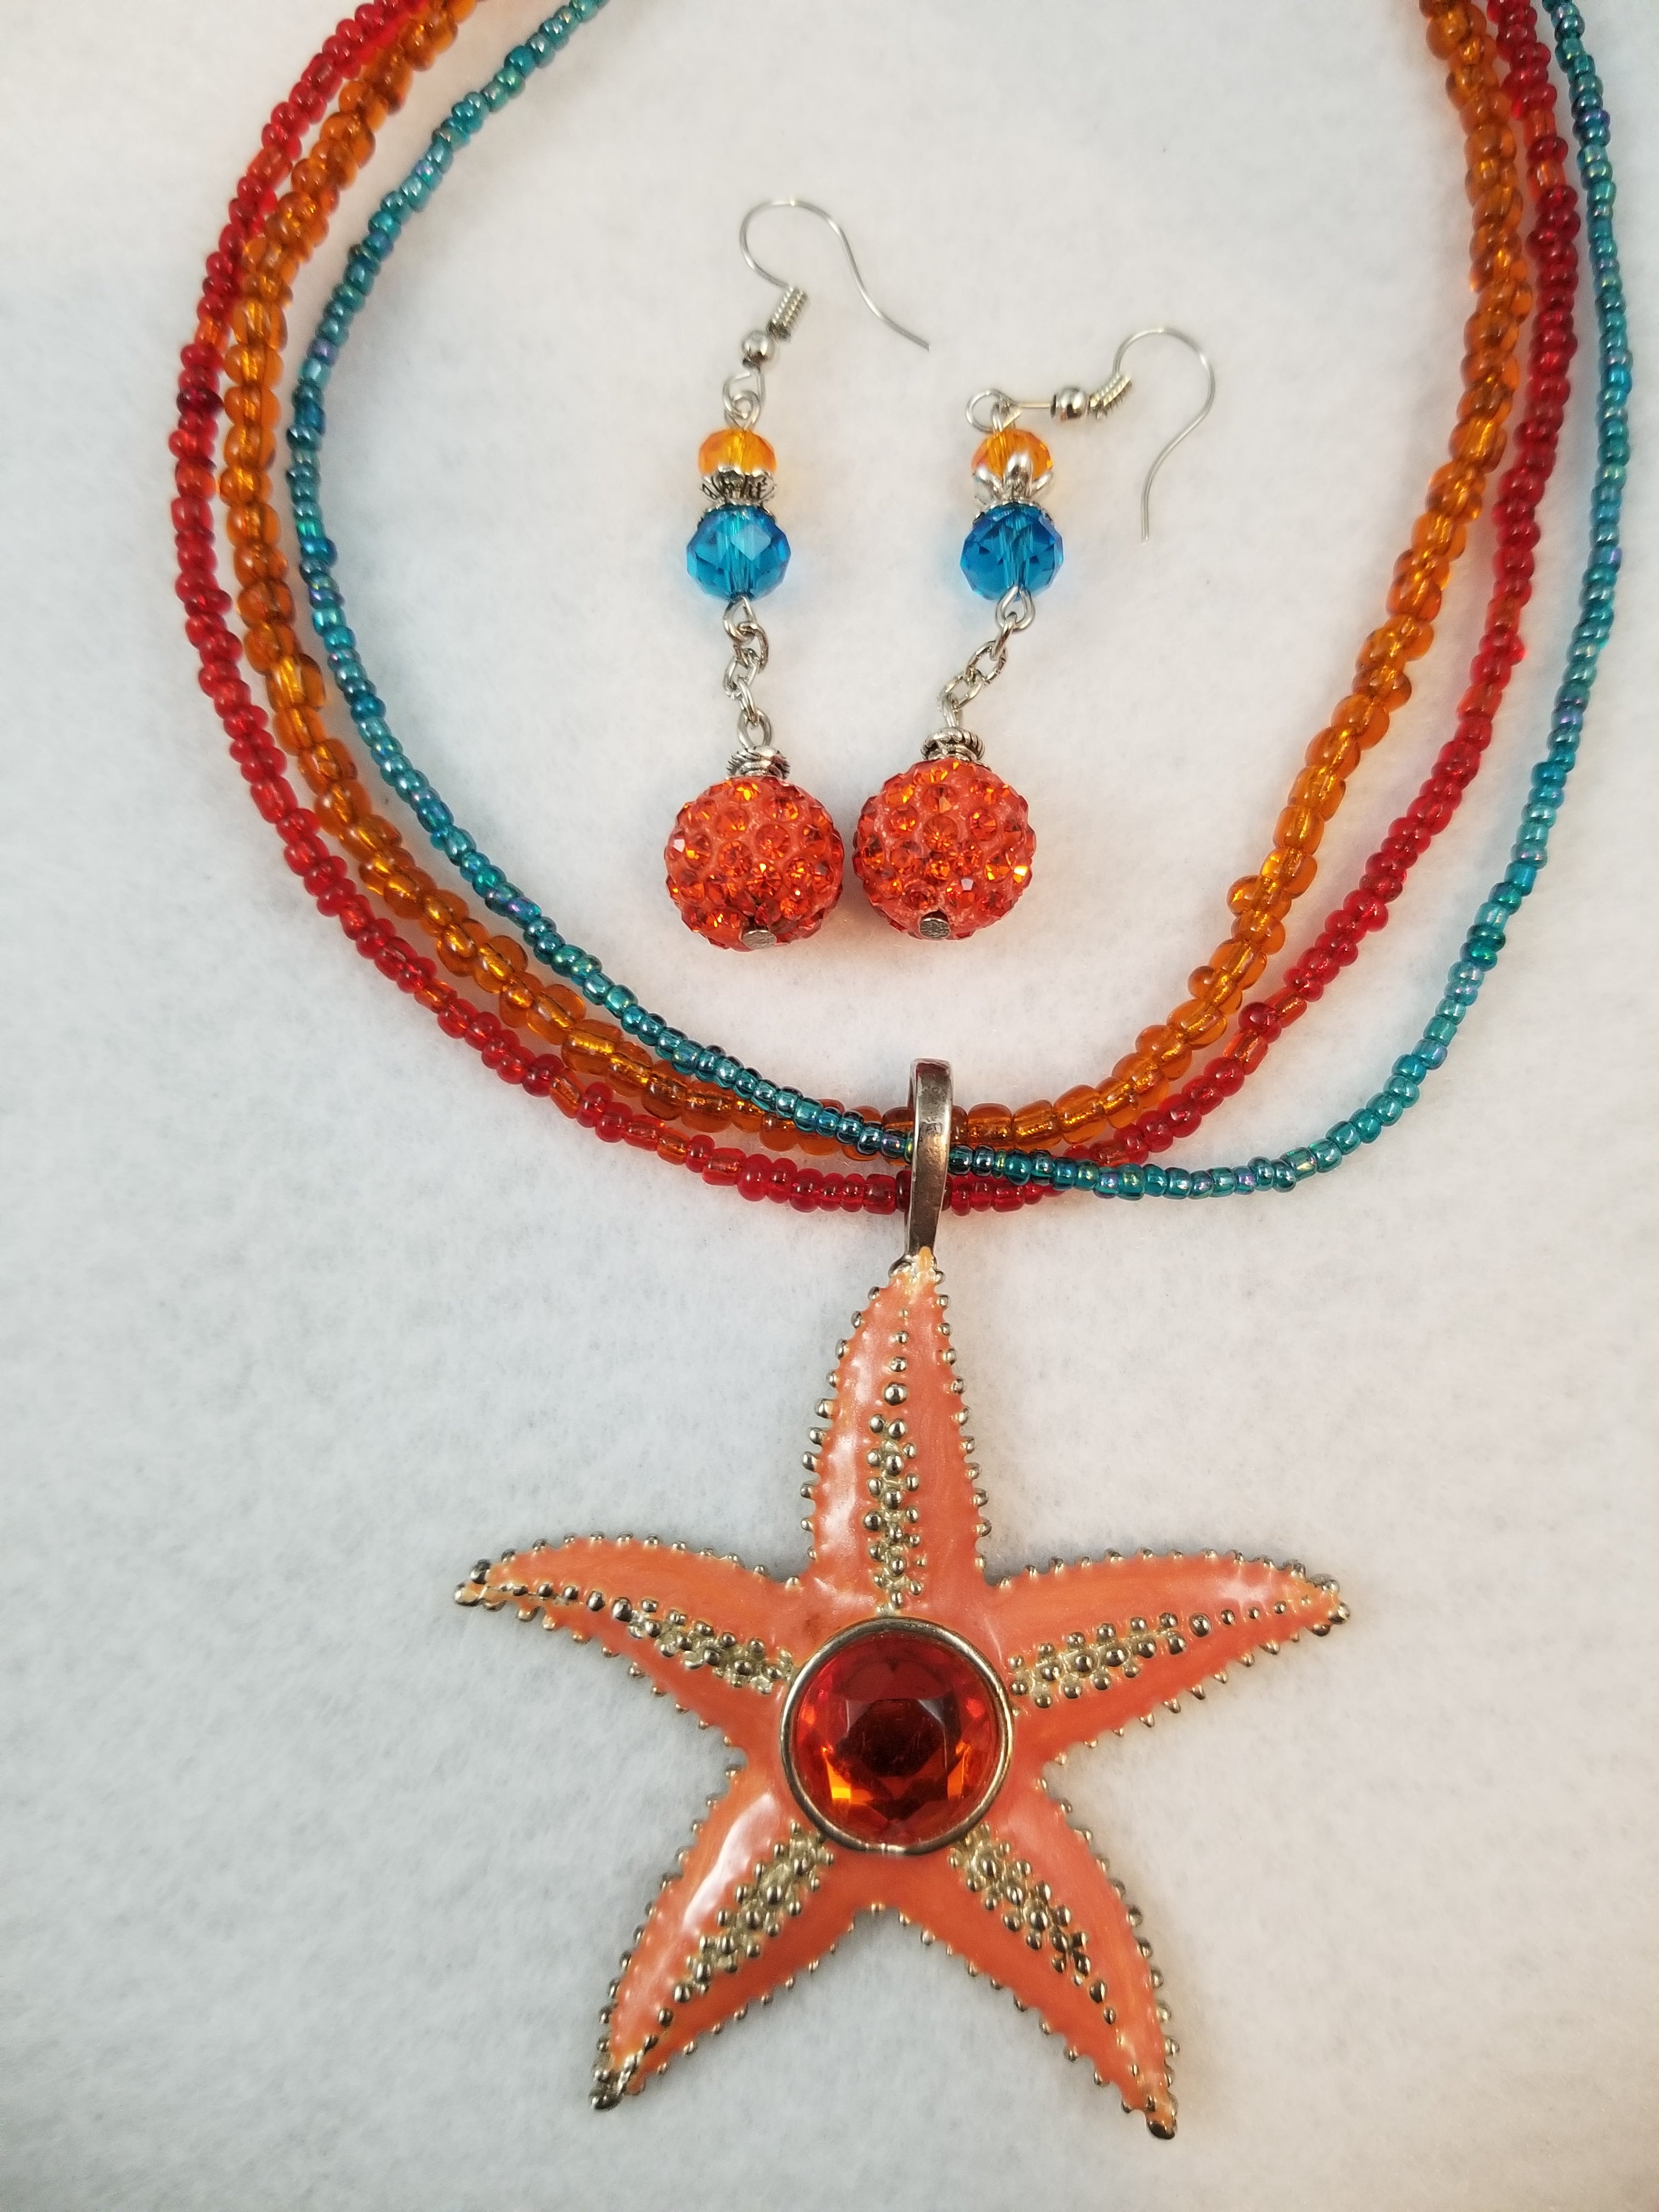 Orange Starfish Necklace with Earrings